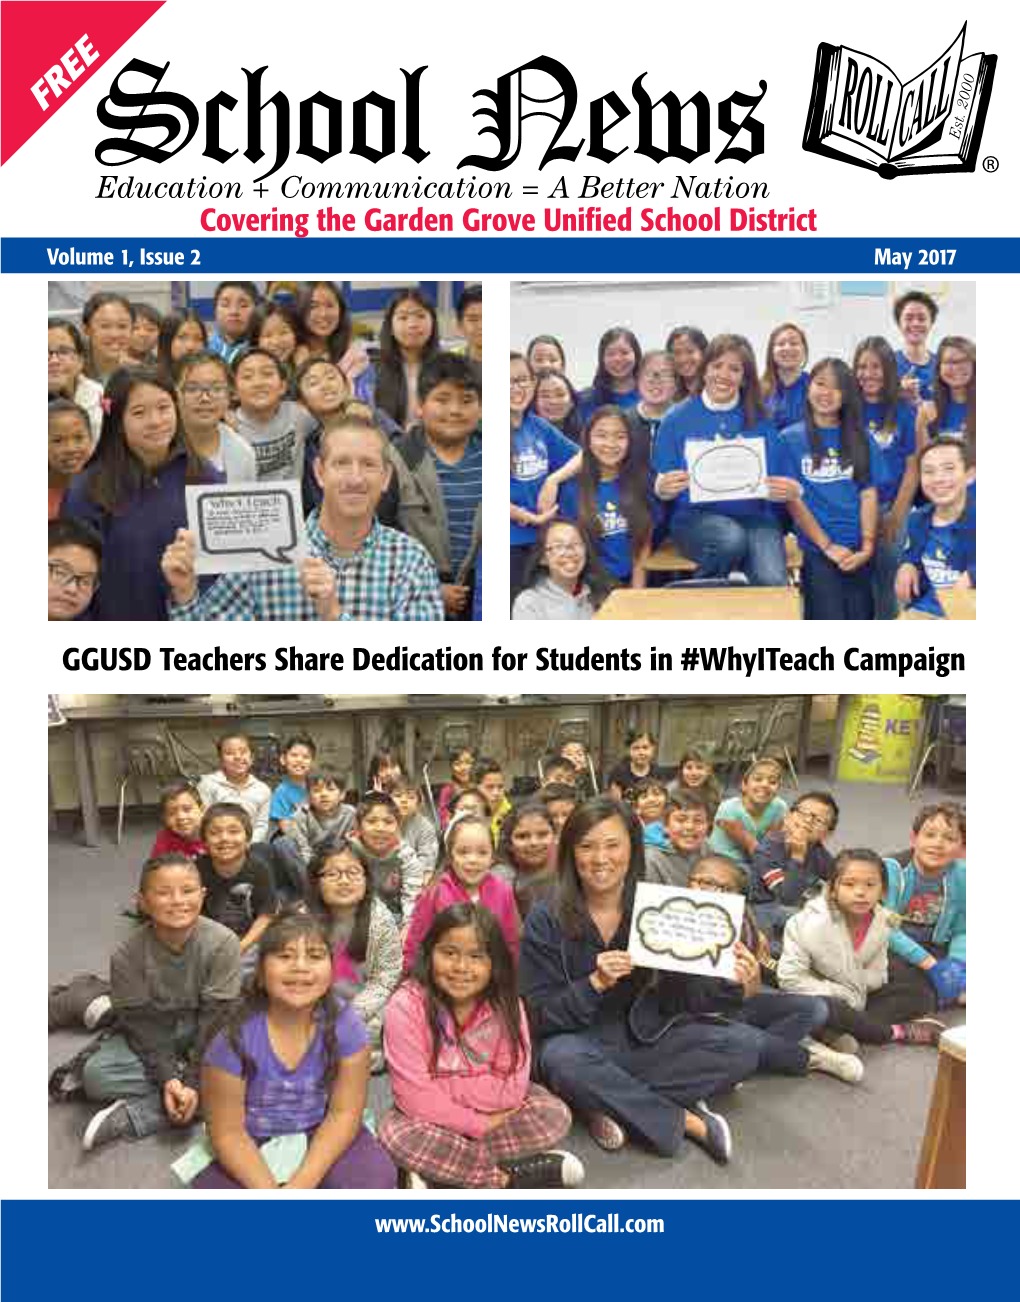 Education + Communication = a Better Nation ® Covering the Garden Grove Unified School District Volume 1, Issue 2 May 2017